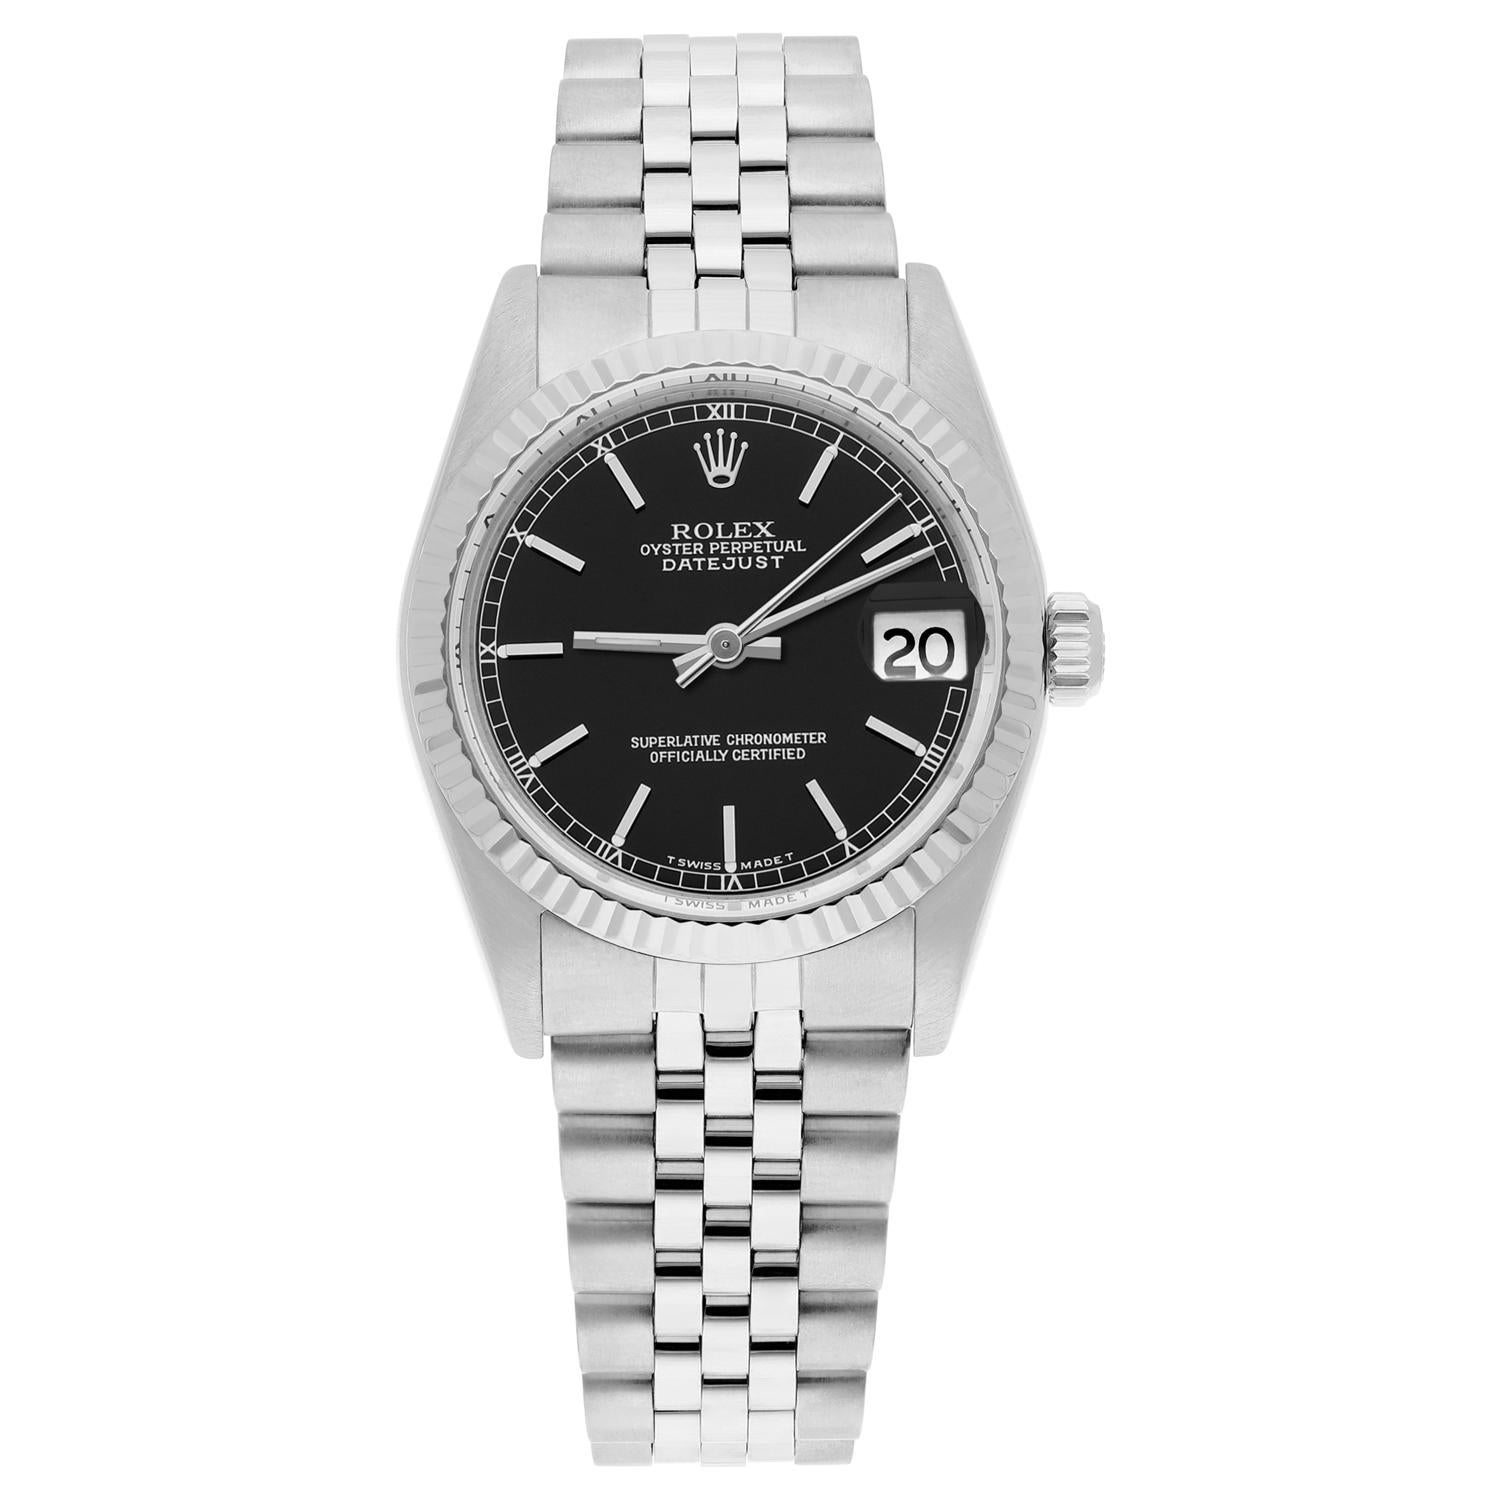 This watch has been professionally polished, serviced and is in excellent overall condition. There are absolutely no visible scratches or blemishes. It is a genuine Rolex which has been inspected to verify authenticity.

Sale comes with a jewelry